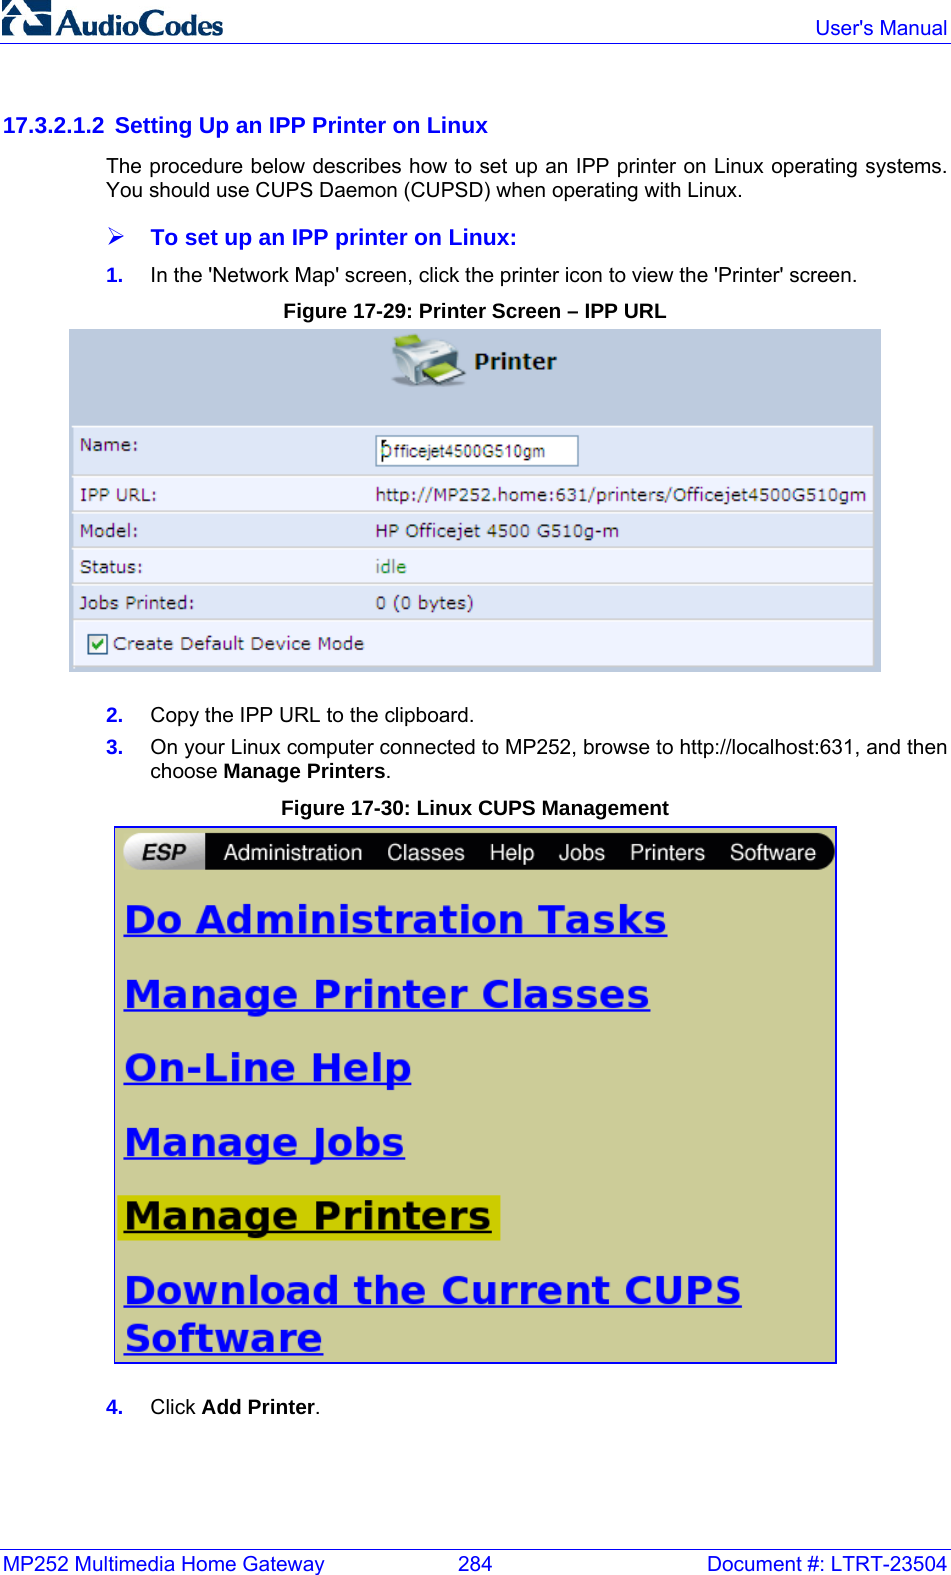 MP252 Multimedia Home Gateway  284  Document #: LTRT-23504  User&apos;s Manual  17.3.2.1.2  Setting Up an IPP Printer on Linux The procedure below describes how to set up an IPP printer on Linux operating systems. You should use CUPS Daemon (CUPSD) when operating with Linux. ¾ To set up an IPP printer on Linux: 1.  In the &apos;Network Map&apos; screen, click the printer icon to view the &apos;Printer&apos; screen. Figure 17-29: Printer Screen – IPP URL  2.  Copy the IPP URL to the clipboard. 3.  On your Linux computer connected to MP252, browse to http://localhost:631, and then choose Manage Printers. Figure 17-30: Linux CUPS Management  4.  Click Add Printer. 